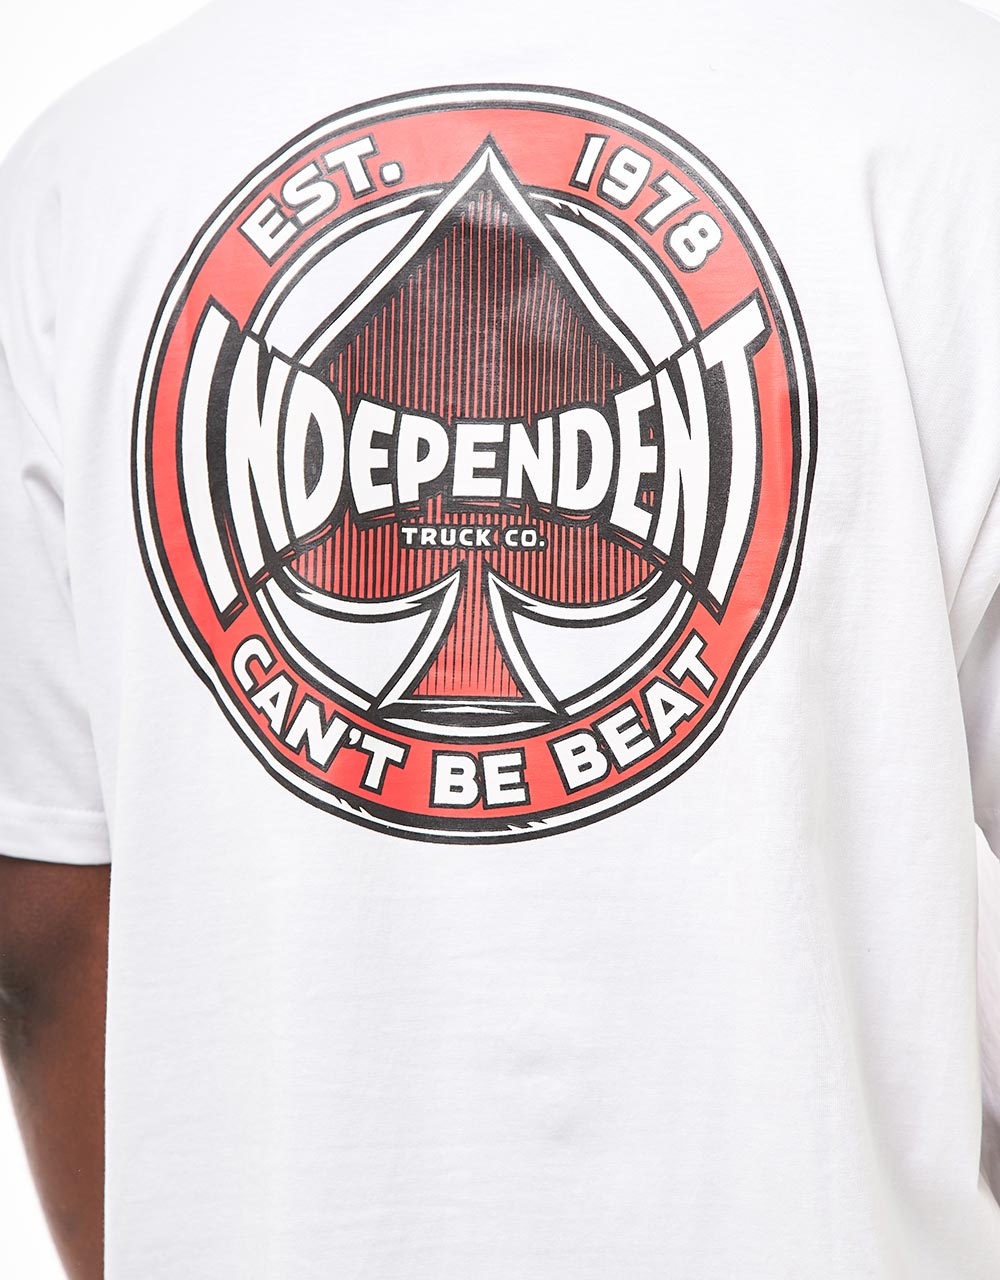 Independent Can’t Be Beat 78 T-Shirt - White